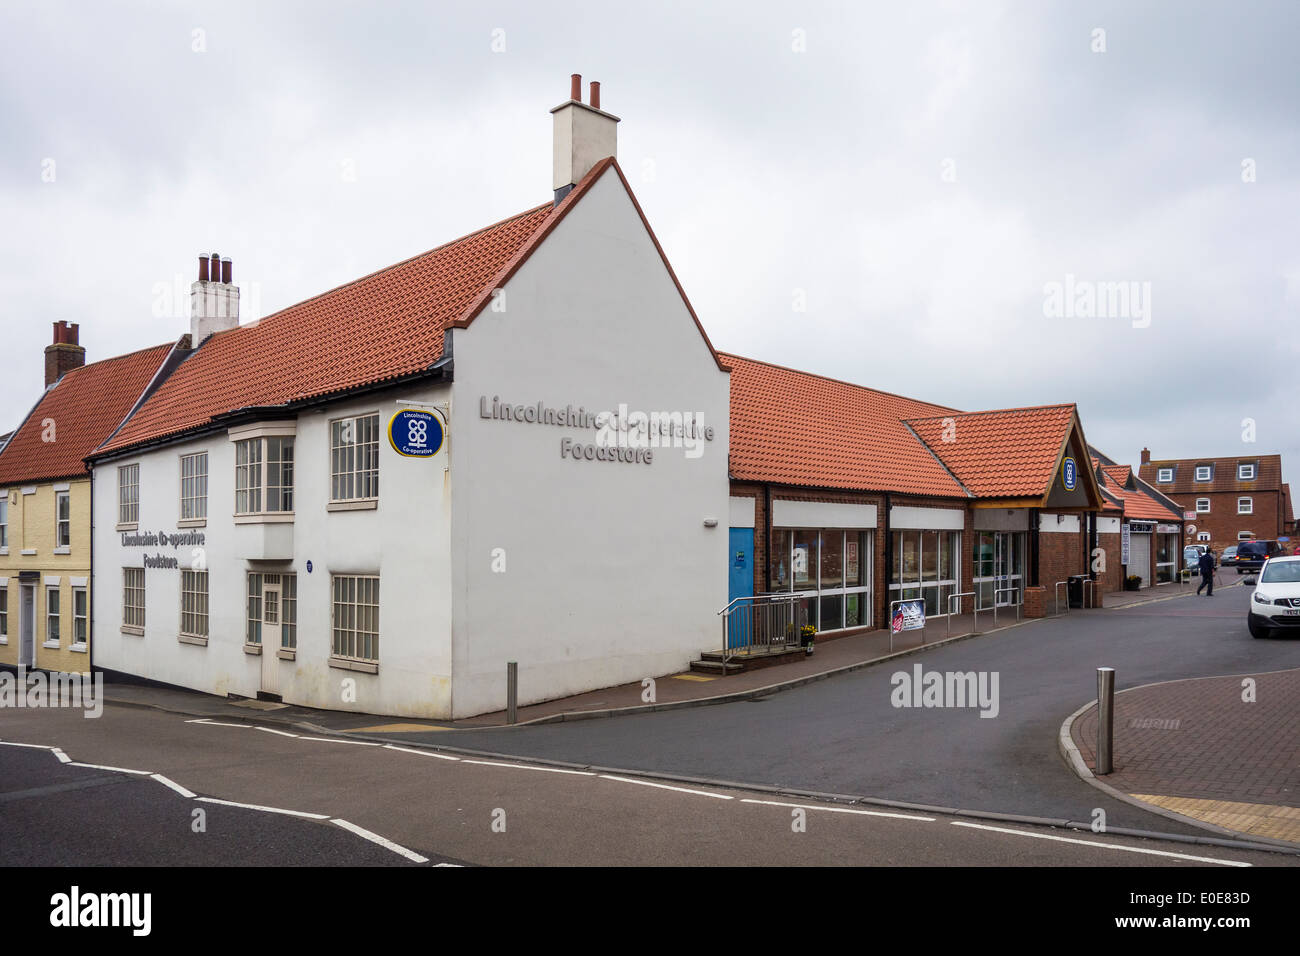 Lincolnshire Foodstore Cooperativa High Street Caistor Foto Stock